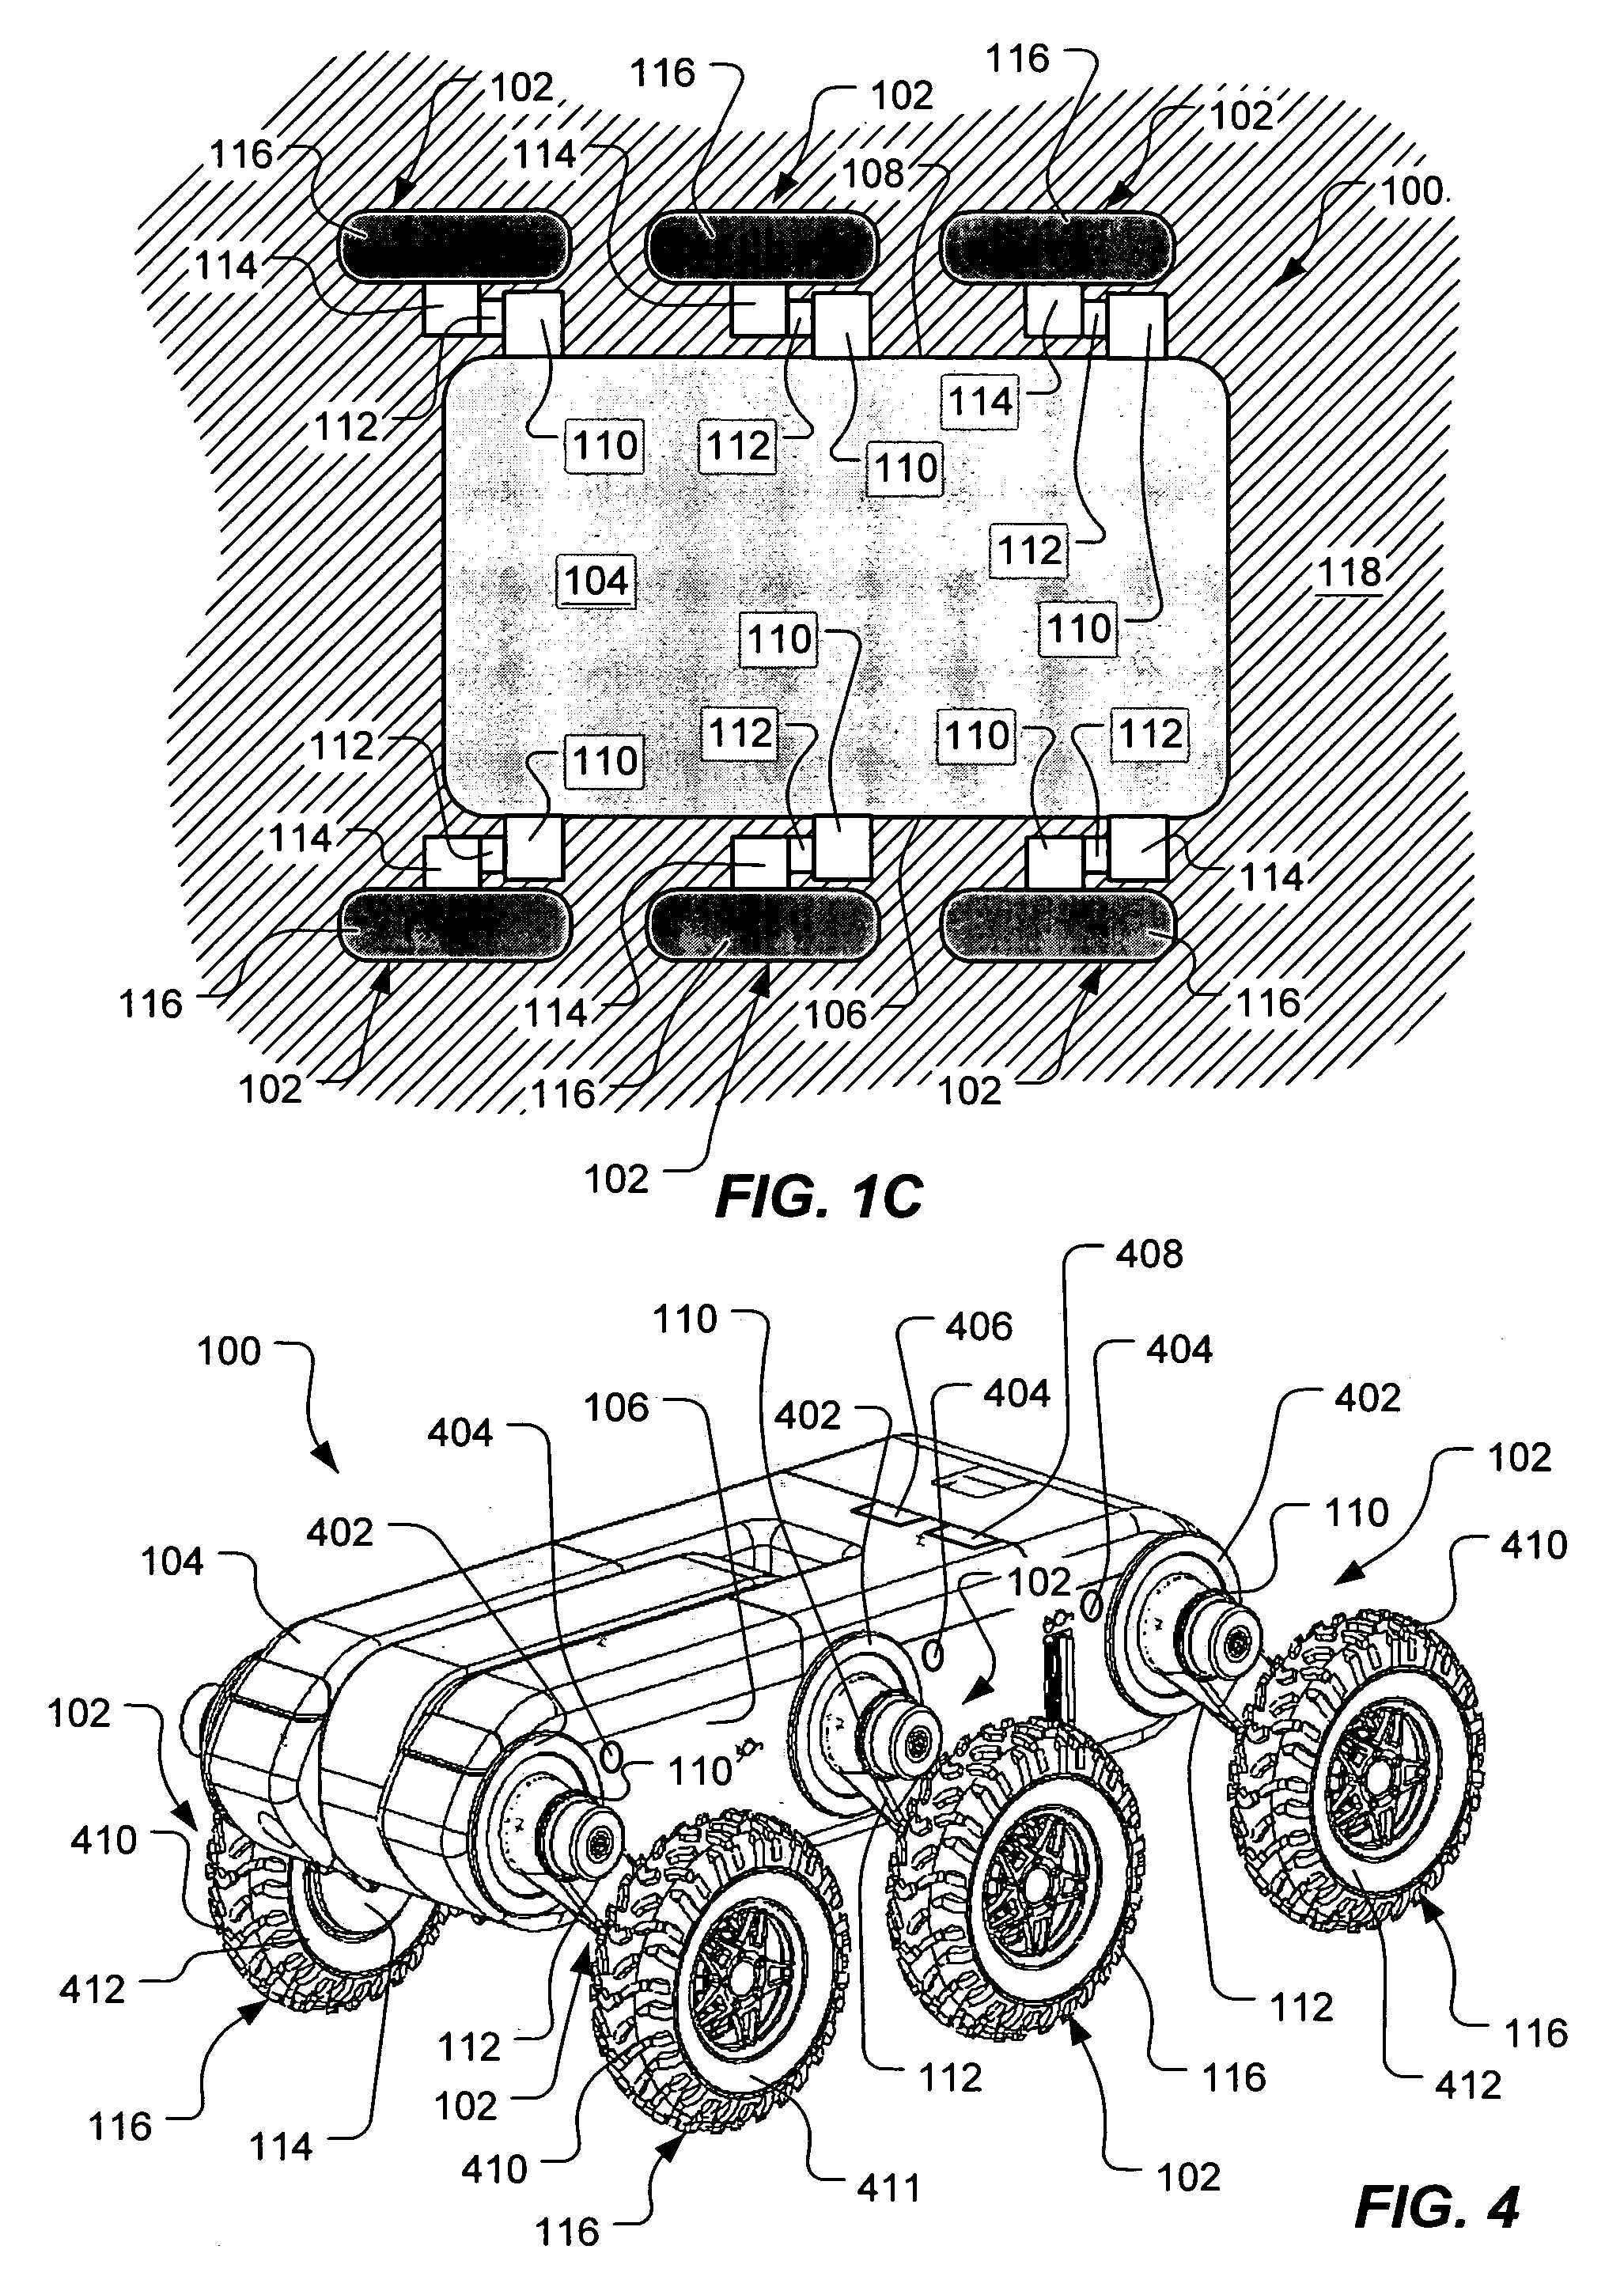 System and method for actively controlling traction in an articulated vehicle